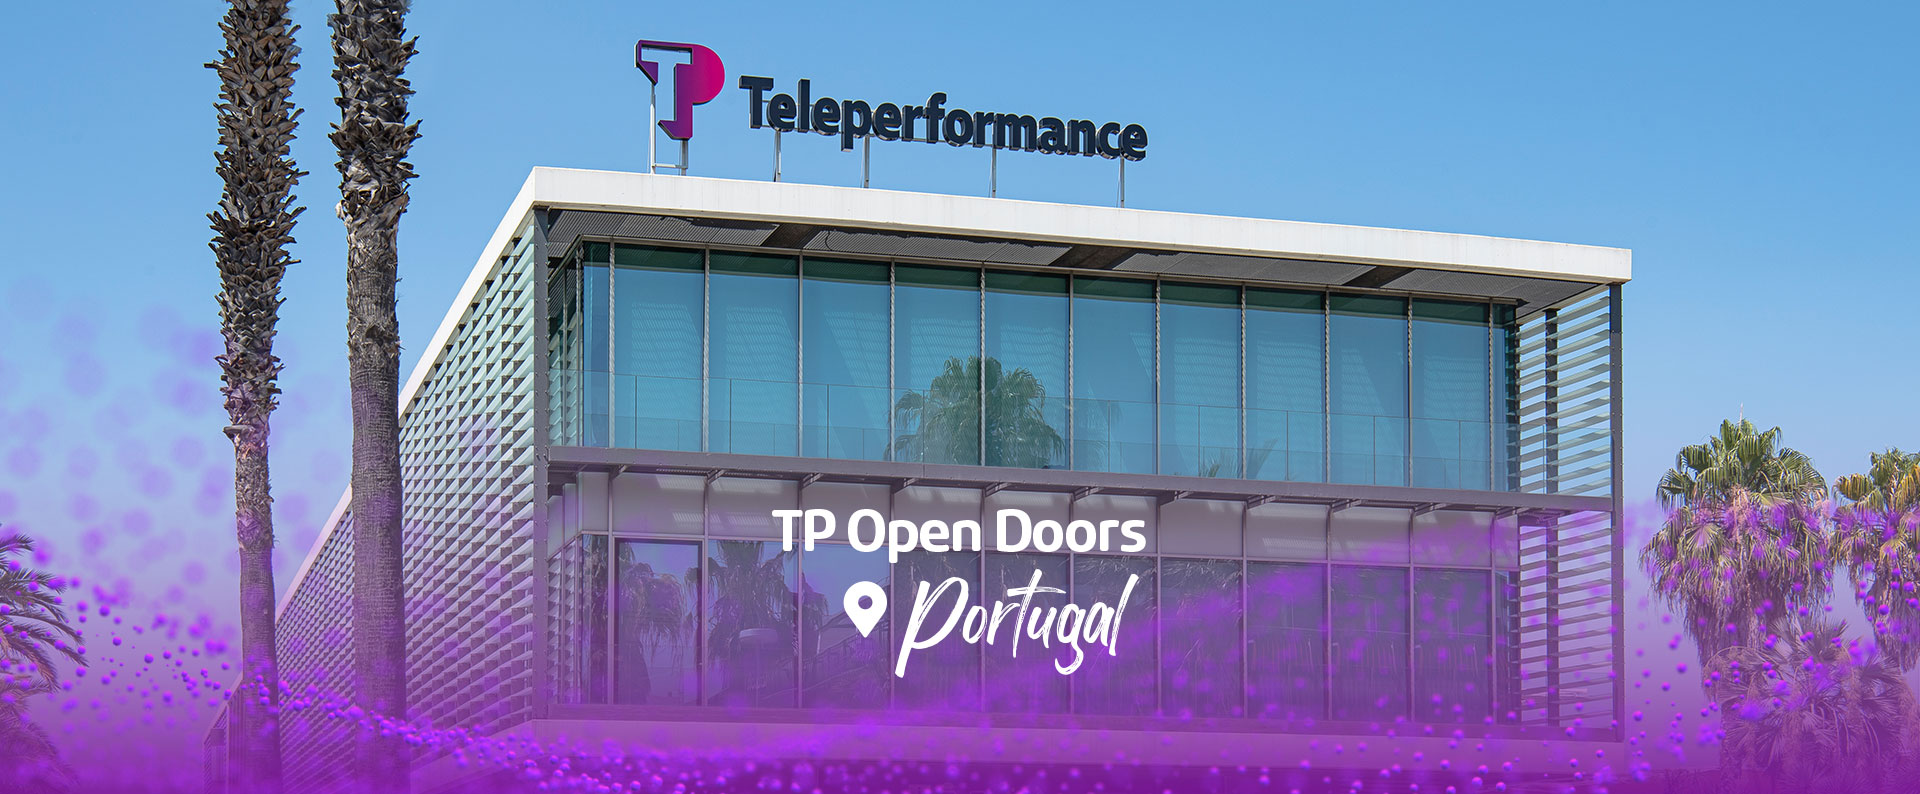 Teleperformance transparency in Portugal